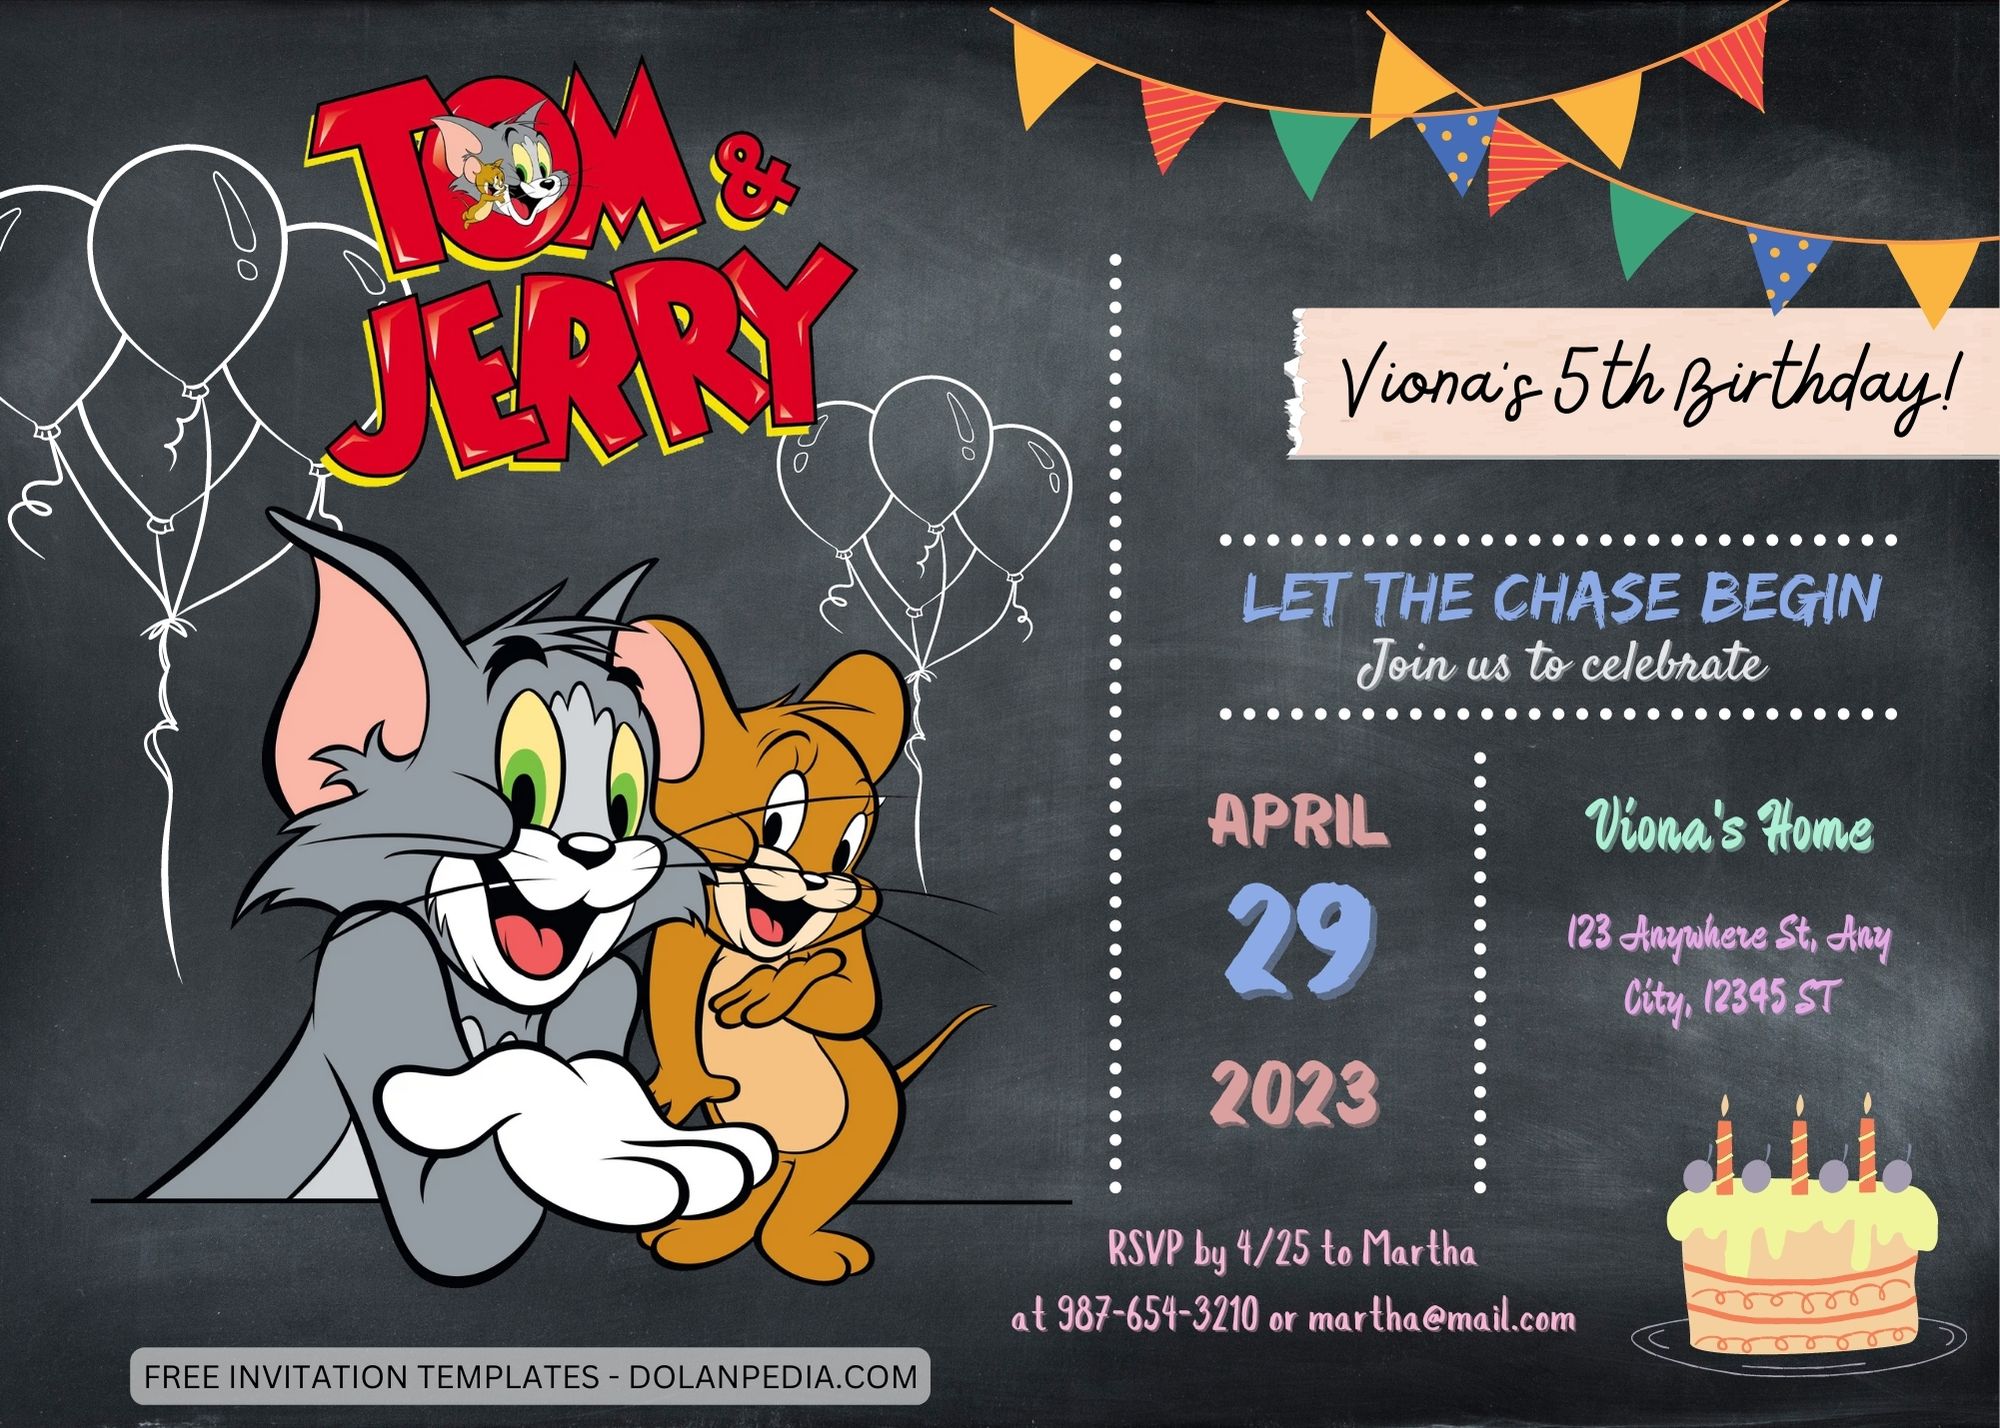 10+ Tom and Jerry Birthday Invitation Templates Title